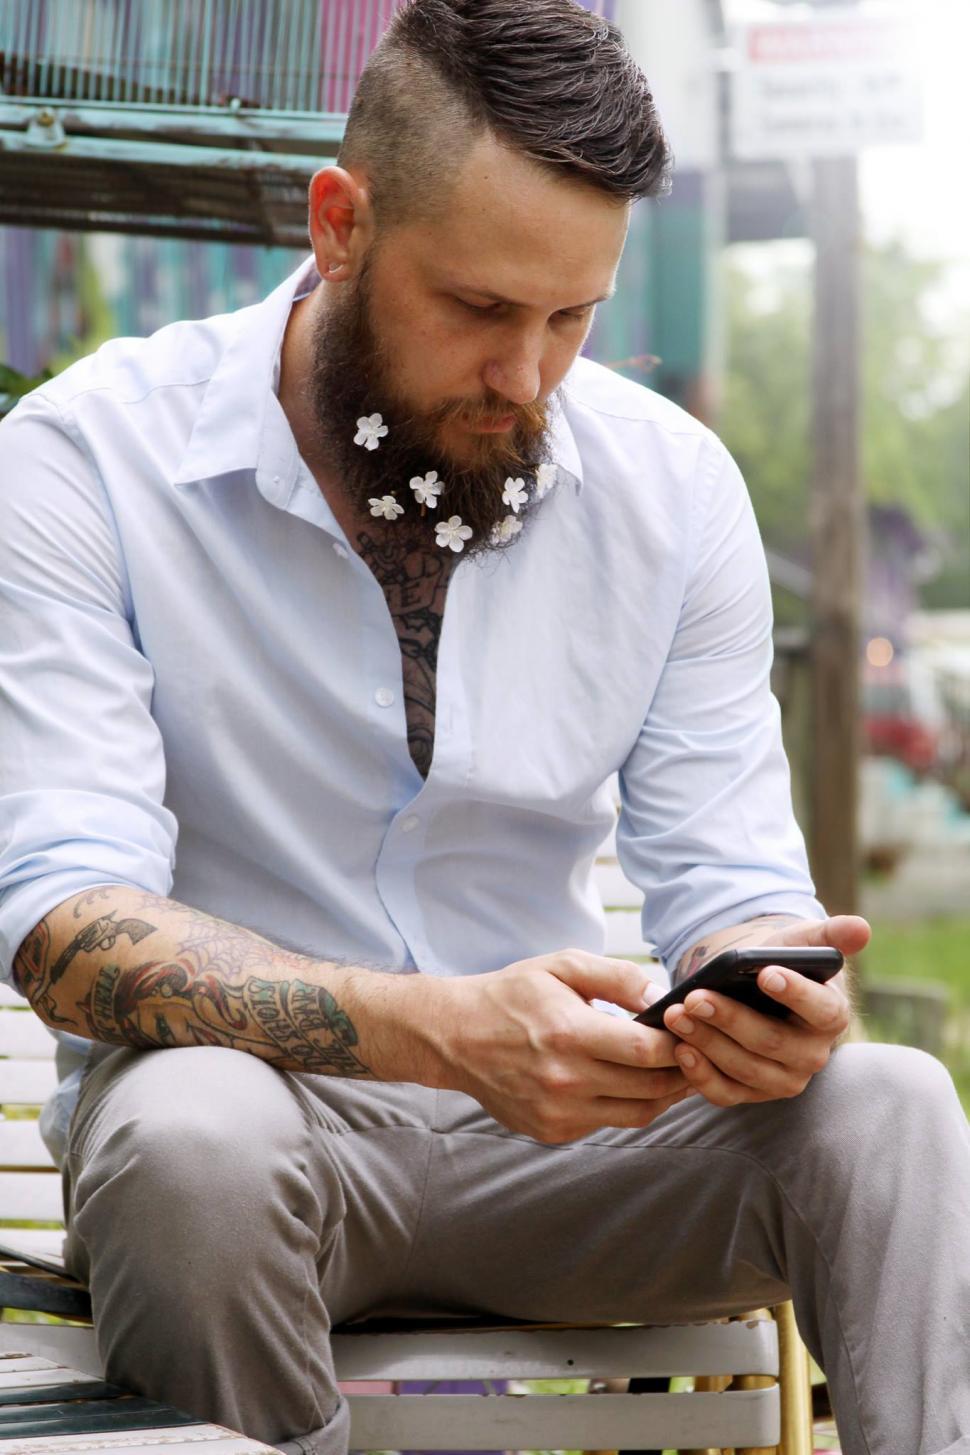 Free Image of Urban man with flowers on beard using cell phone 